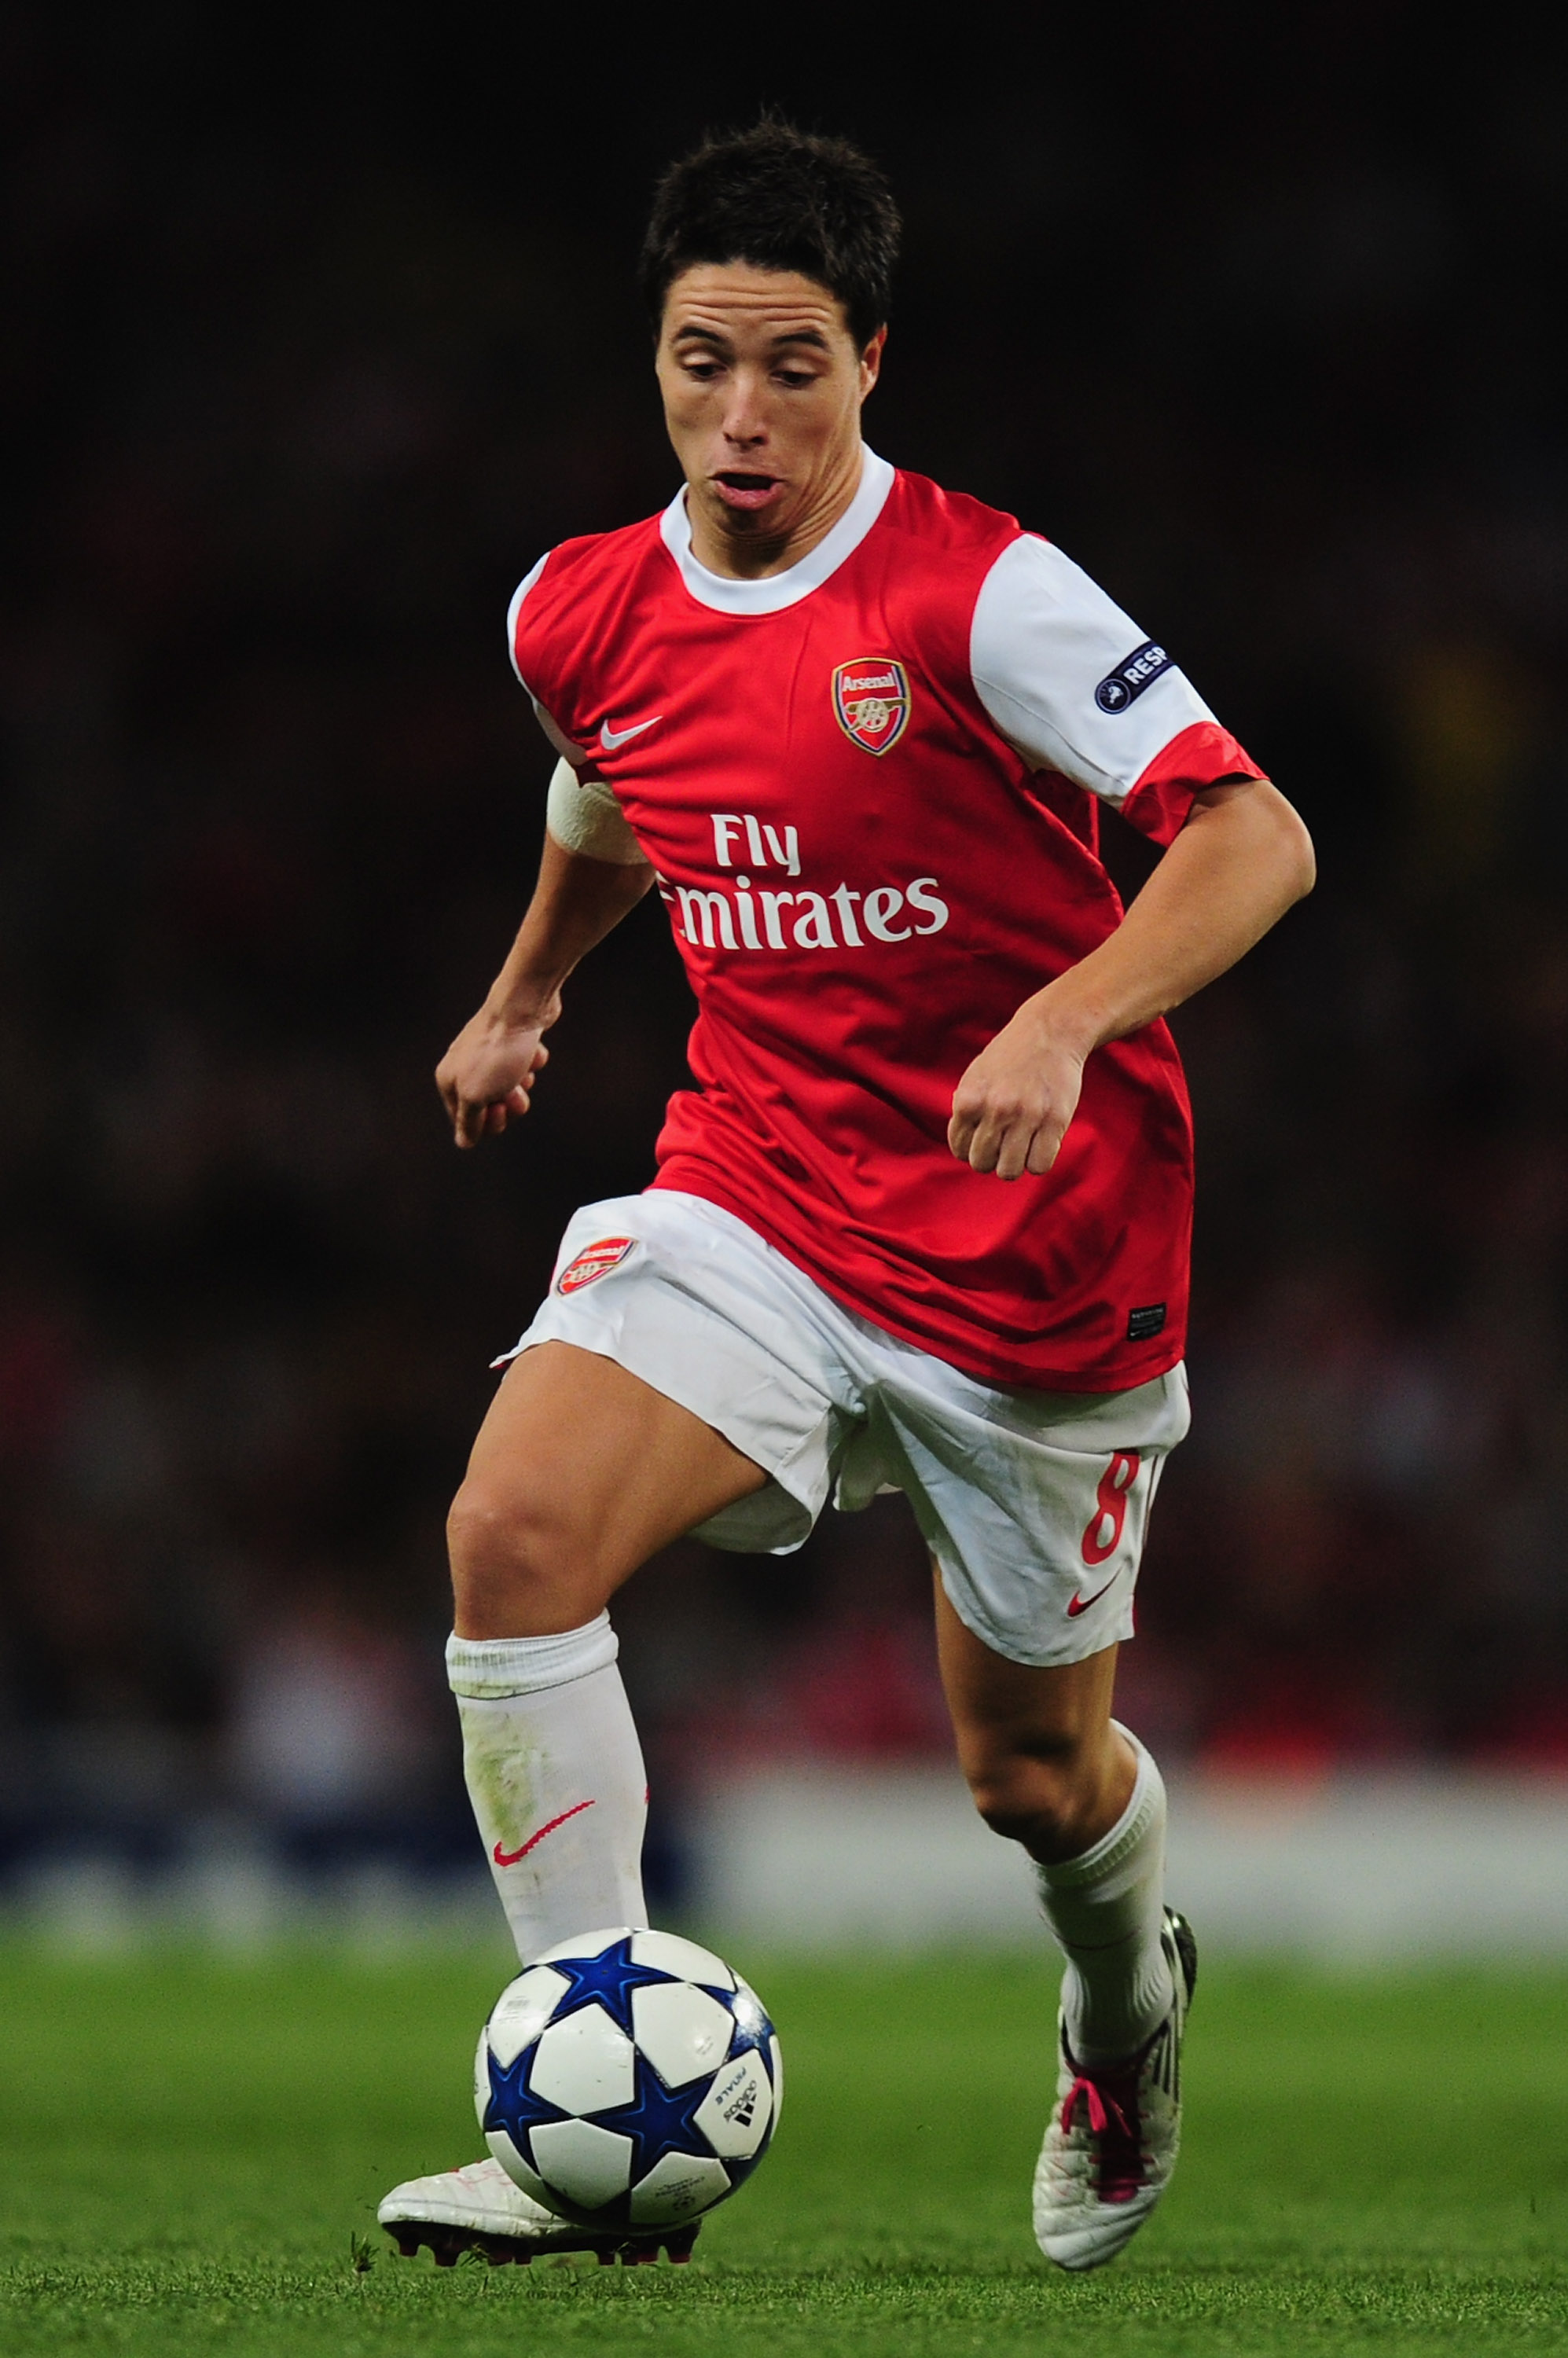 LONDON, ENGLAND - SEPTEMBER 15:  Samir Nasri of Arsenal in action during the UEFA Champions League Group H match between Arsenal and SC Braga at the Emirates Stadium on September 15, 2010 in London, England.  (Photo by Mike Hewitt/Getty Images)